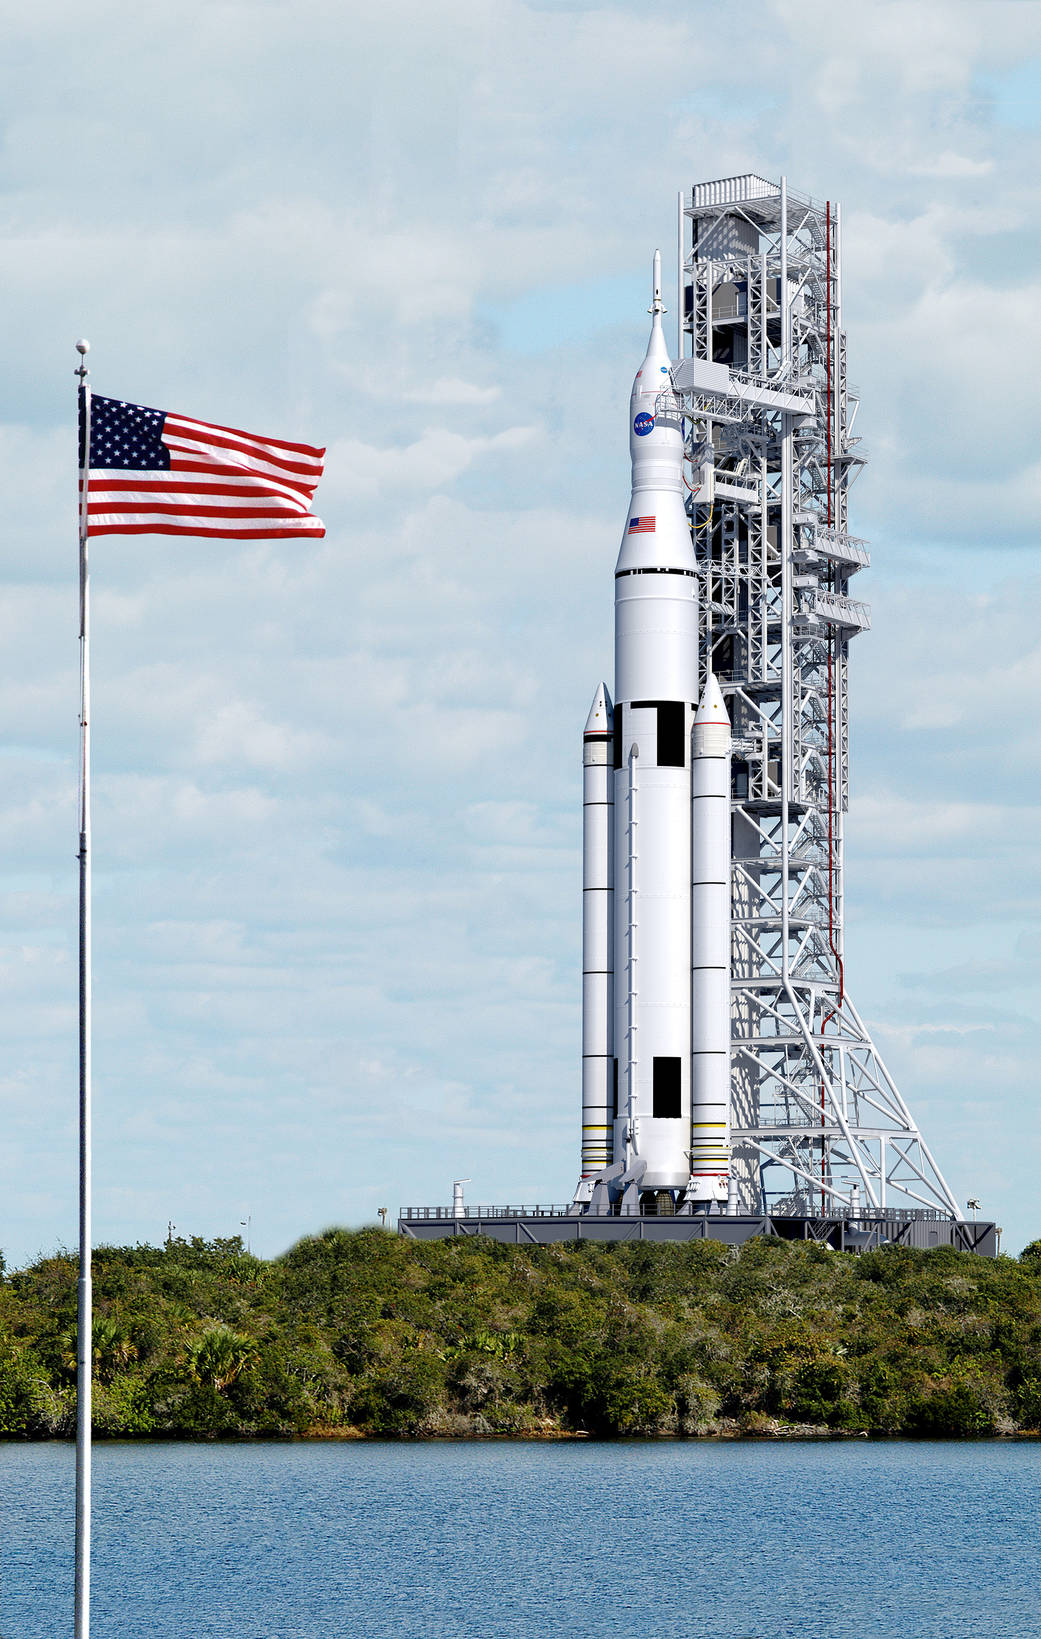 Artist's concept of Space Launch System 70-ton configuration on the launchpad, with American flag.